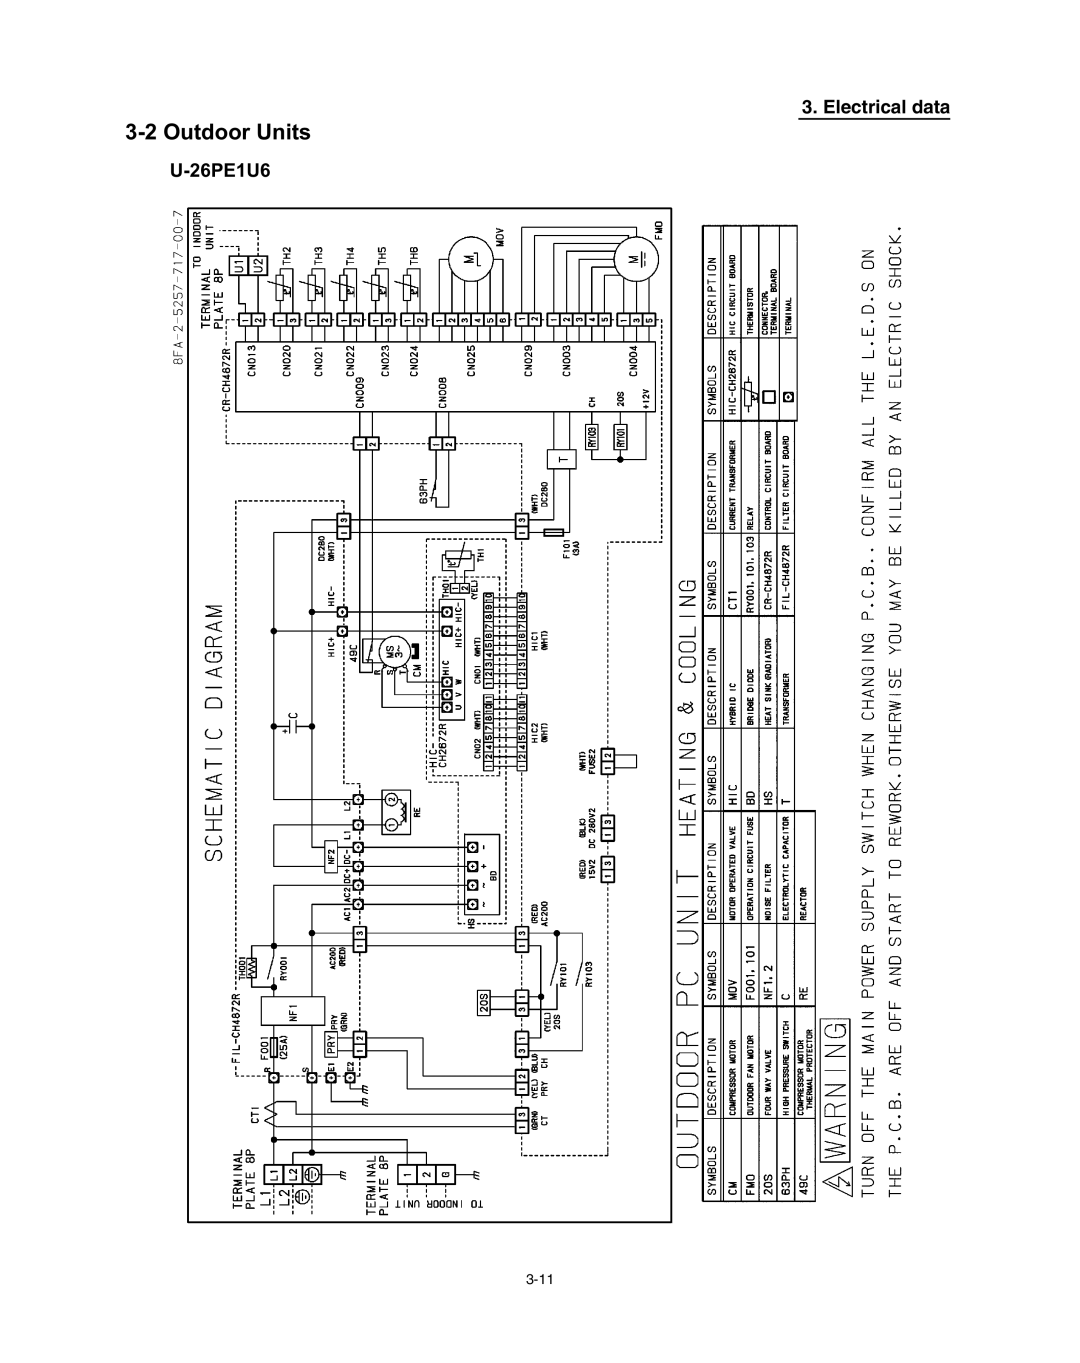 Panasonic R410A service manual 3-2Outdoor Units, Electrical data 